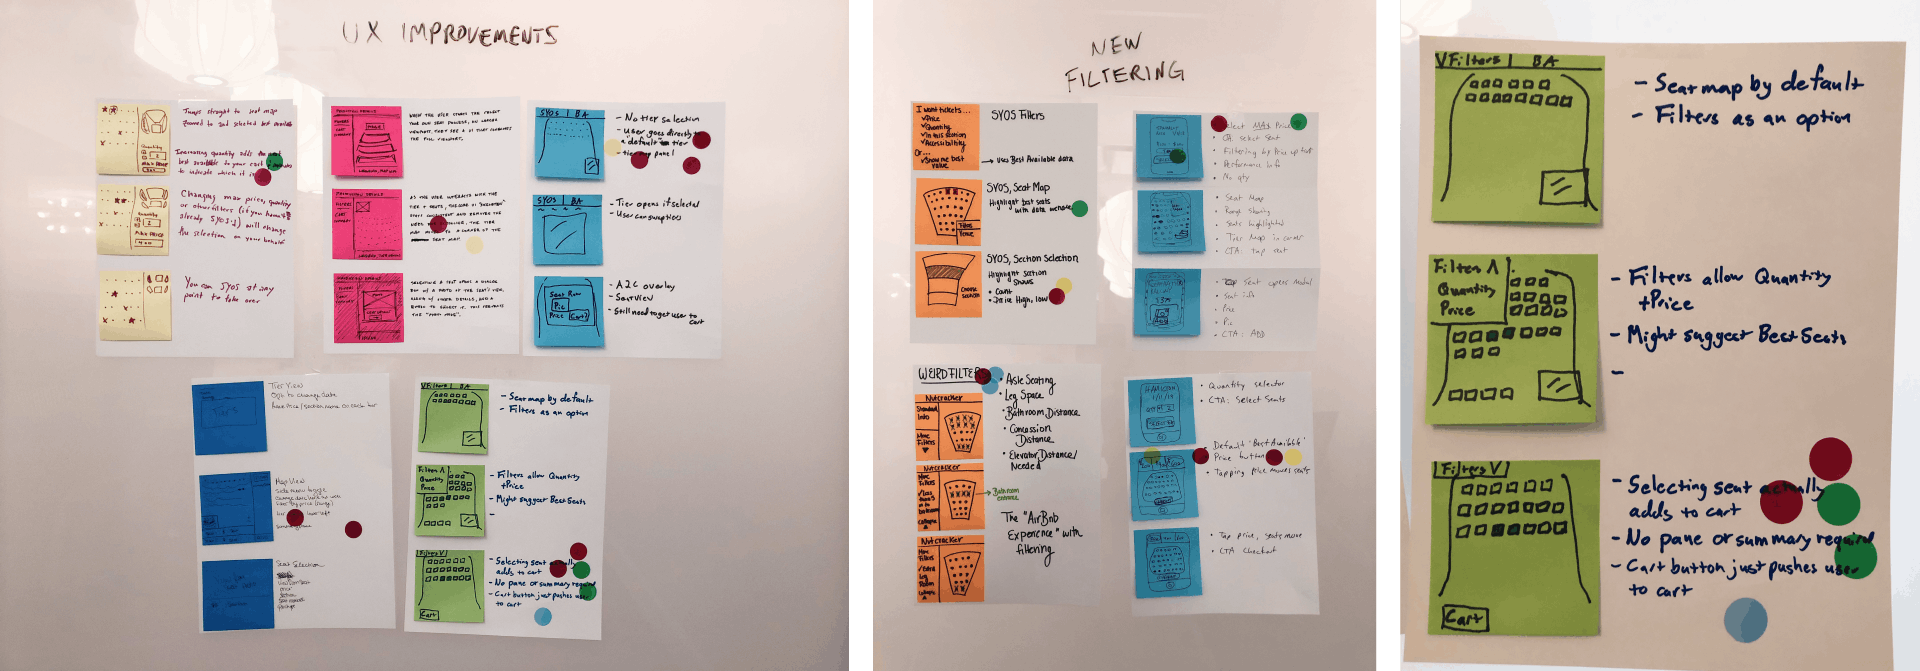 Three photos from the Pittsburgh Cultural Trust design sprint; storyboard sketches arranged on a wall with writing above that says UX Improvements, storyboard sketches arranged on a wall with writing above that says New Filtering, green sticky notes with drawings on them and notes to the right of them.